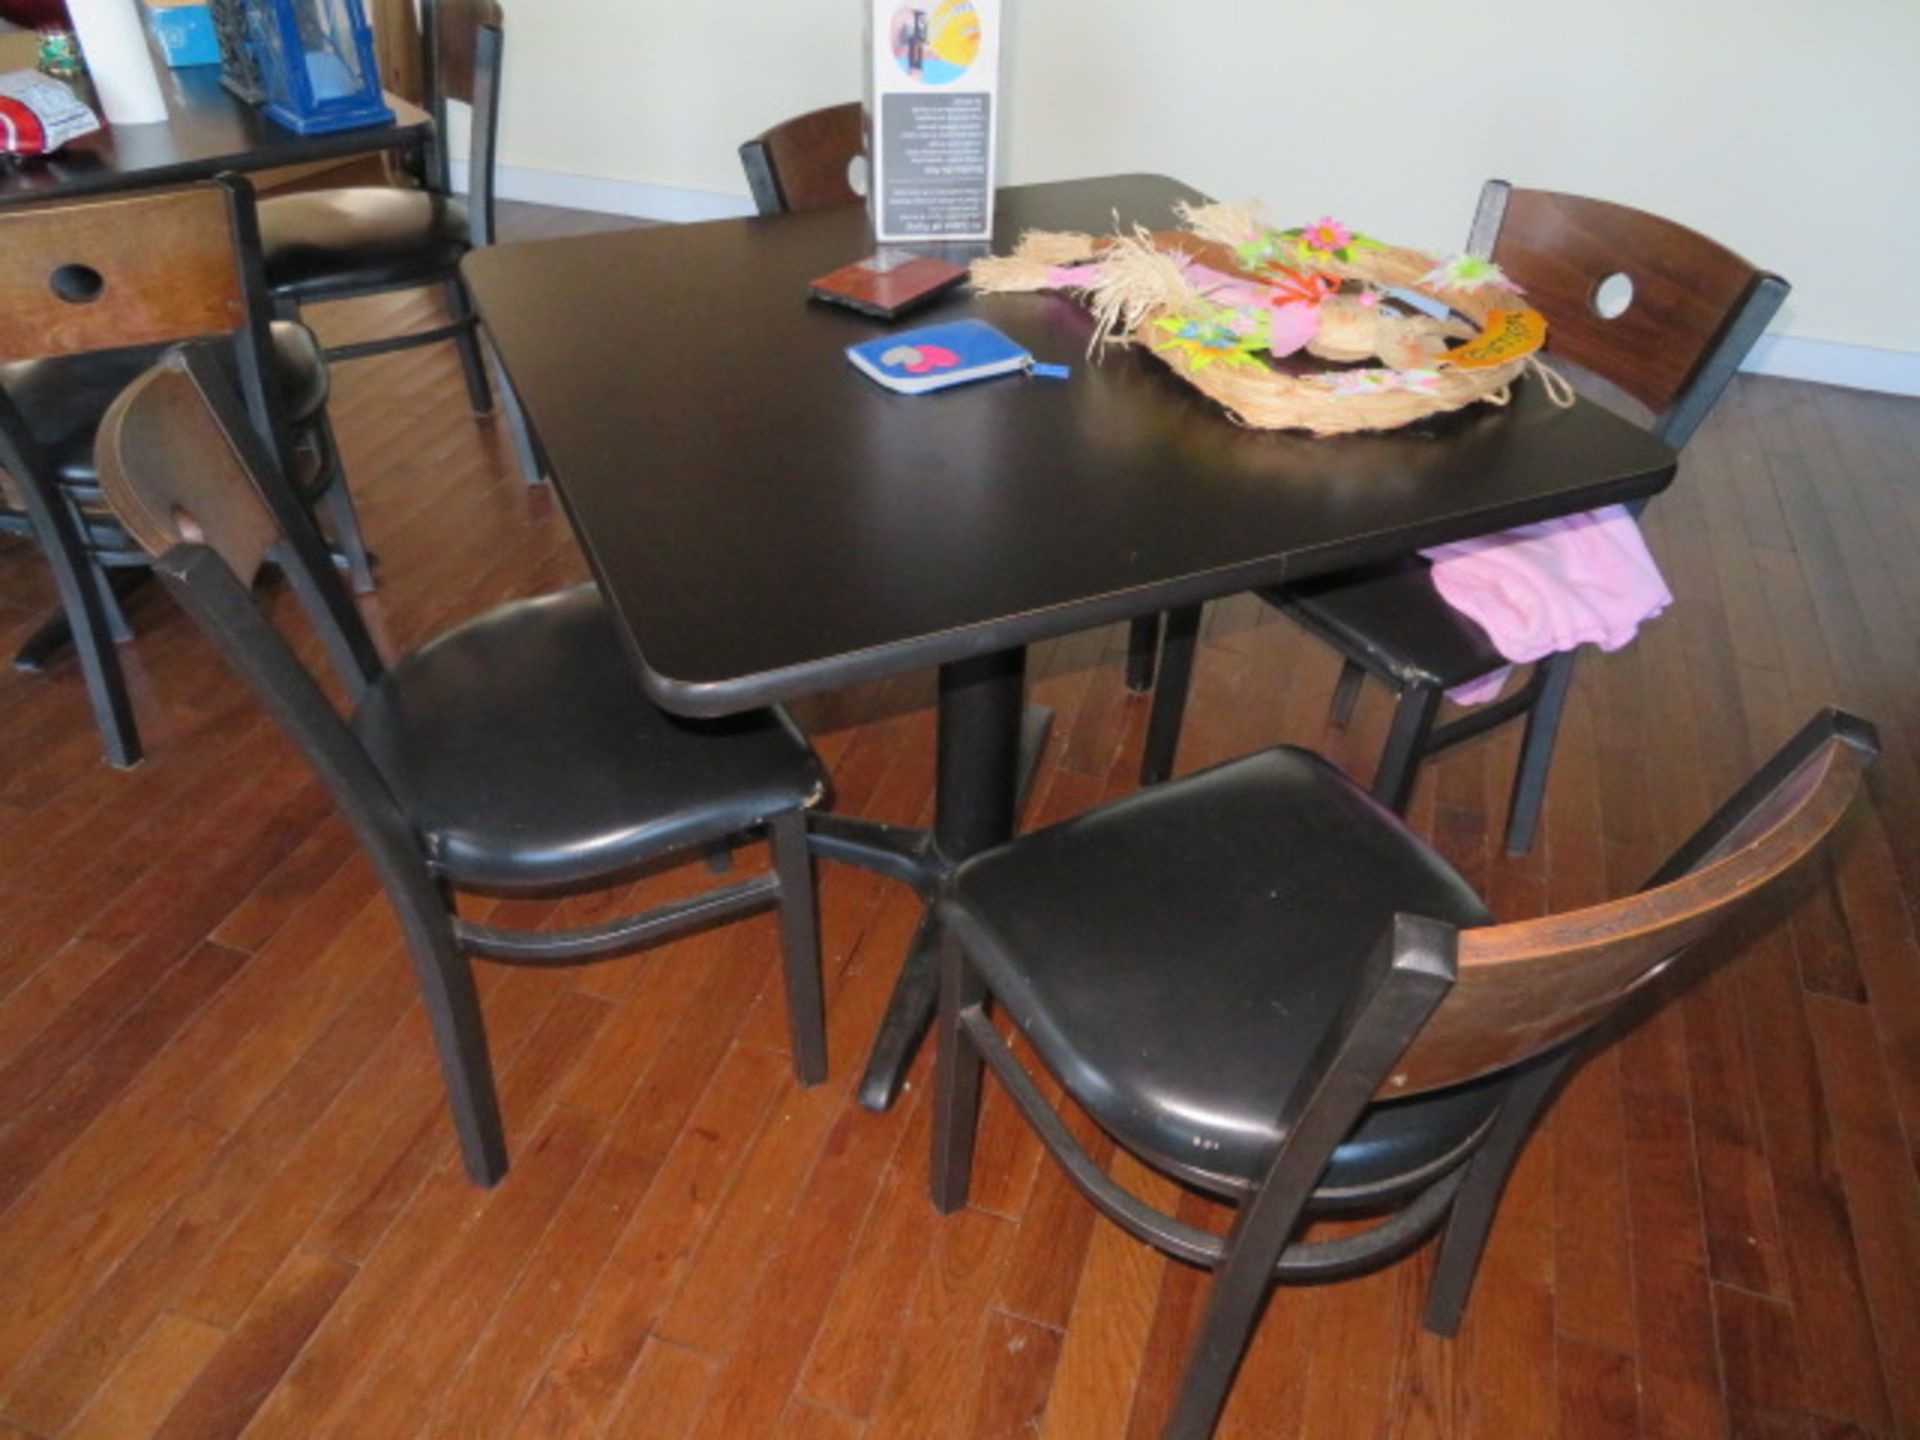 (3) 36" X 36" LAMINATE TOP TABLES 4-LEG SPIDER BASES (Located - Mays Landing, NJ)